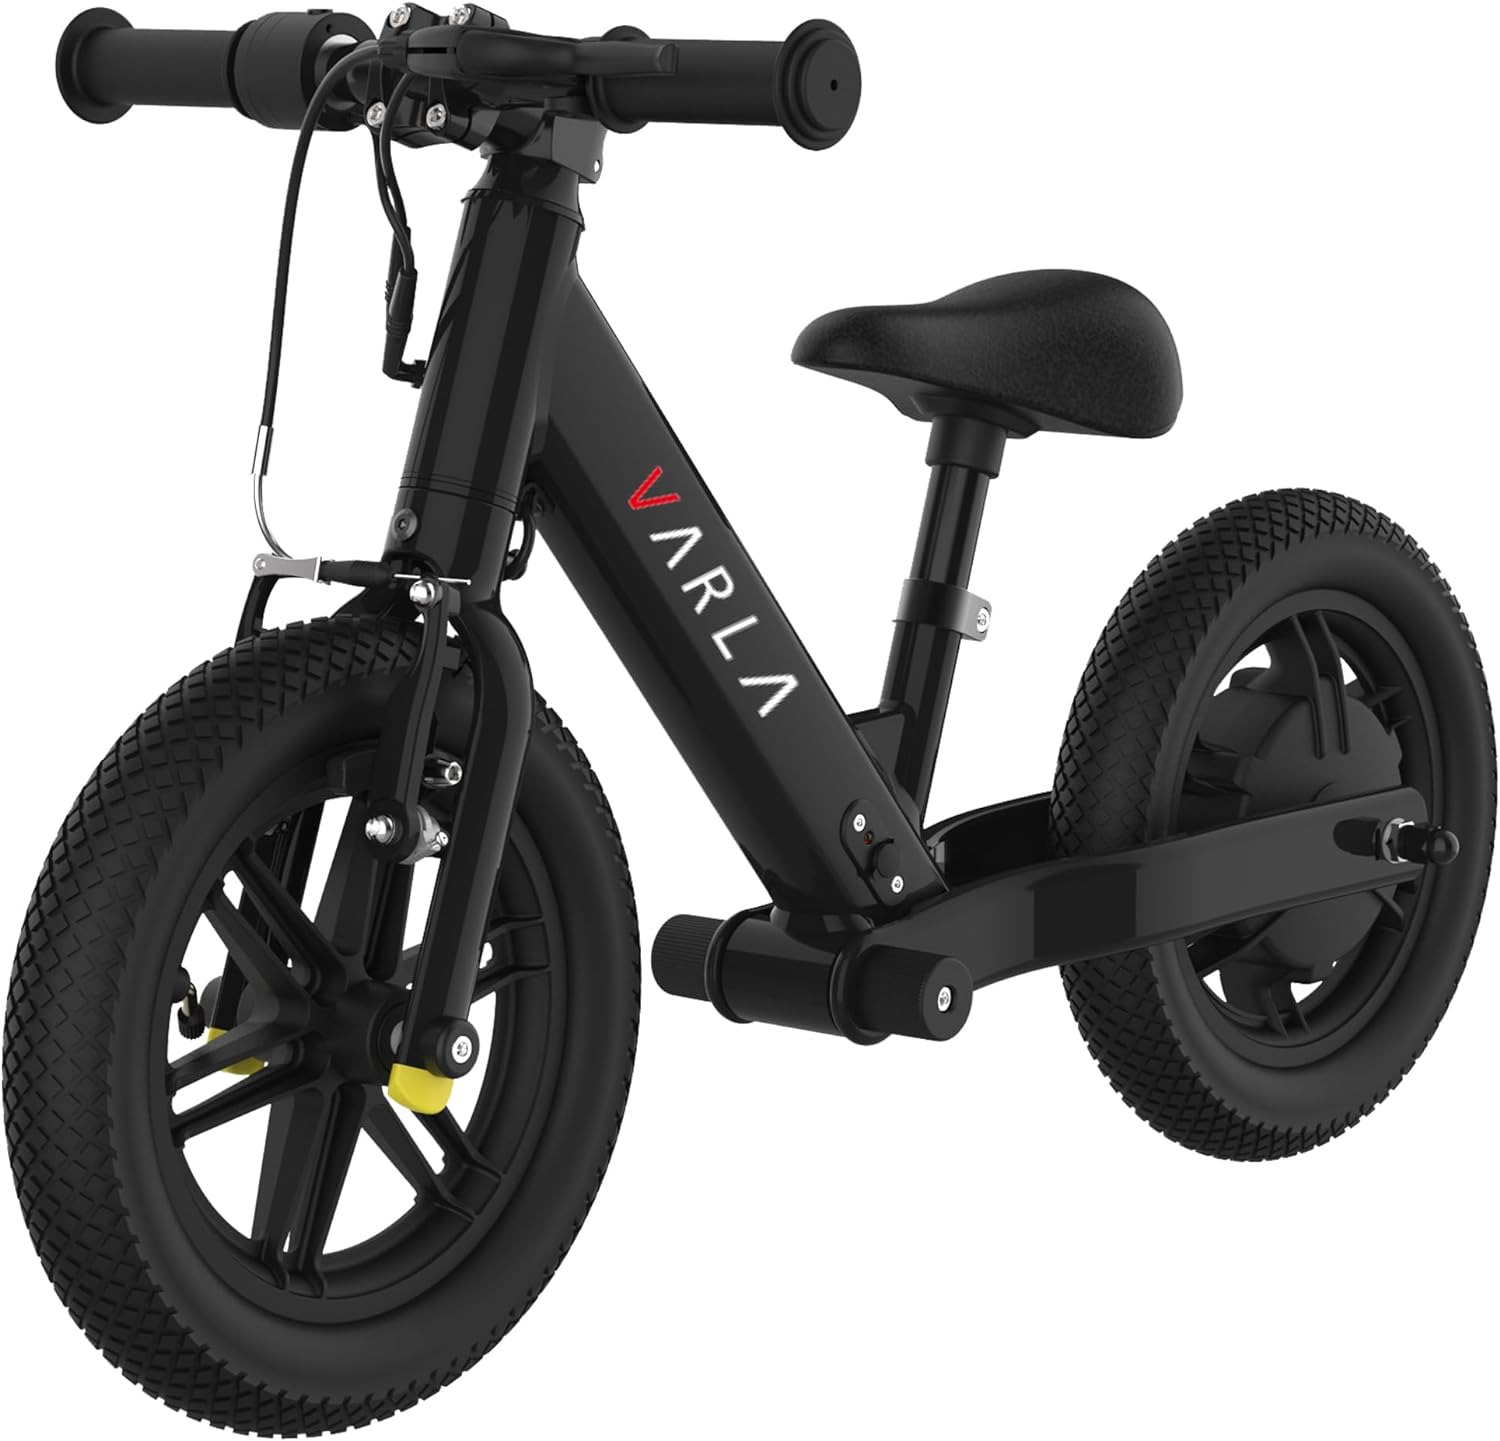 Electric Bike for Kids, 12 Inch Electric Balance Bike for Kids Ages 3-6, Kid ...